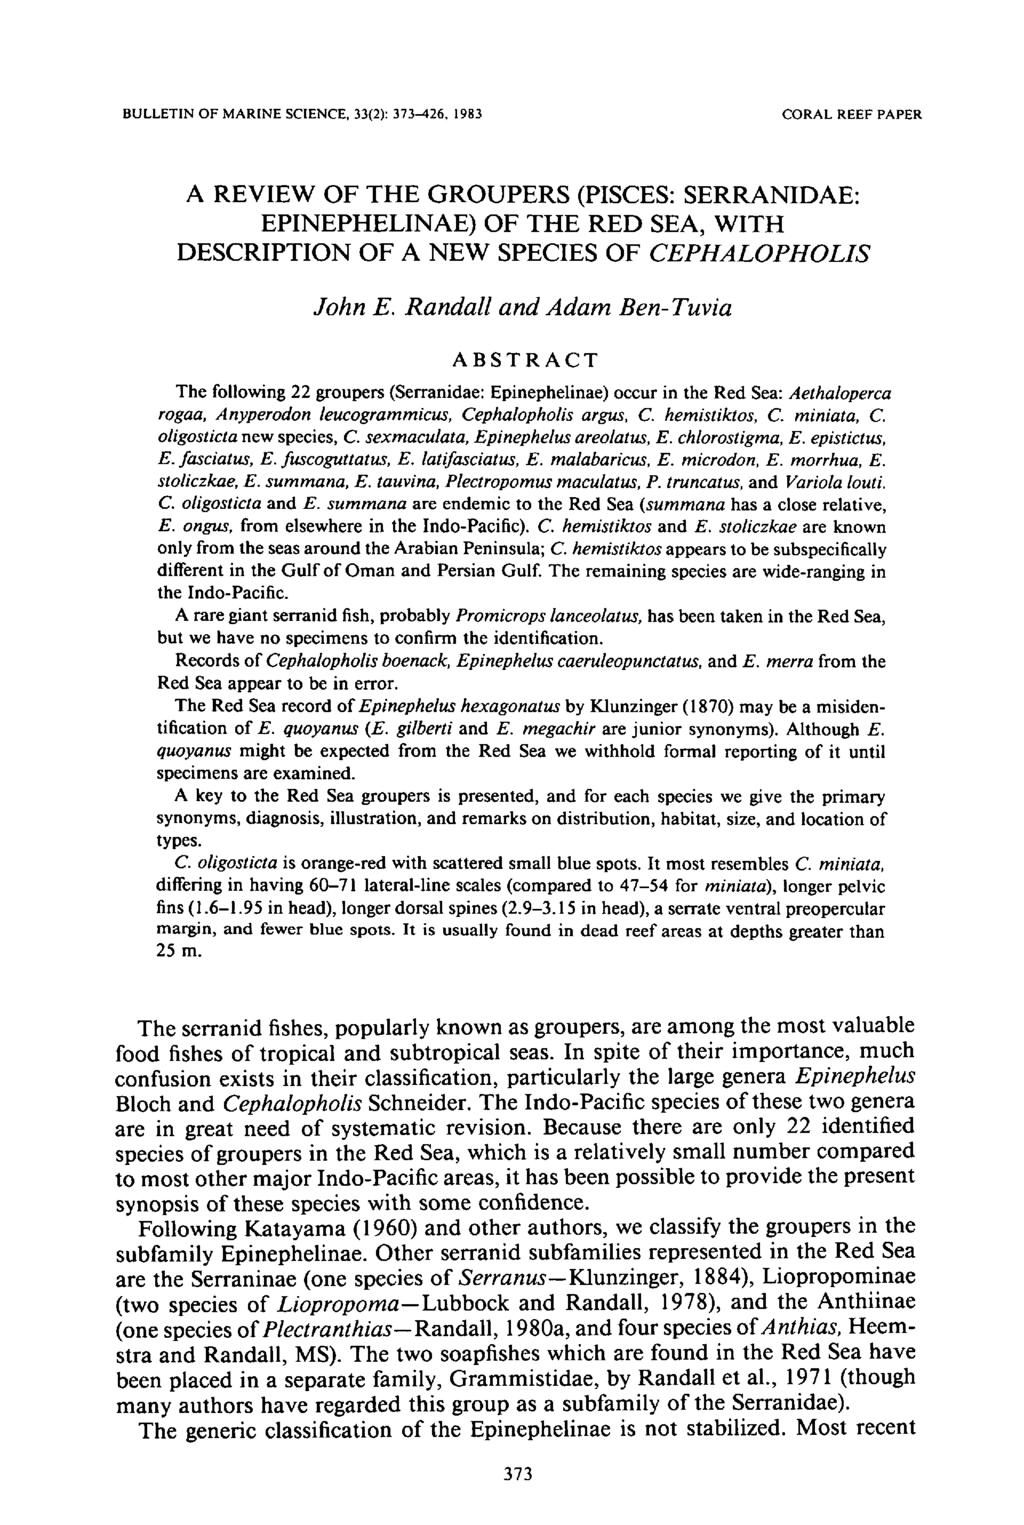 BULLETIN OF MARINE SCIENCE, 33(2): 373-426, 1983 CORAL REEF PAPER A REVIEW OF THE GROUPERS (PISCES: SERRANIDAE: EPINEPHELINAE) OF THE RED SEA, WITH DESCRIPTION OF A NEW SPECIES OF CEPHALOPHOLIS John